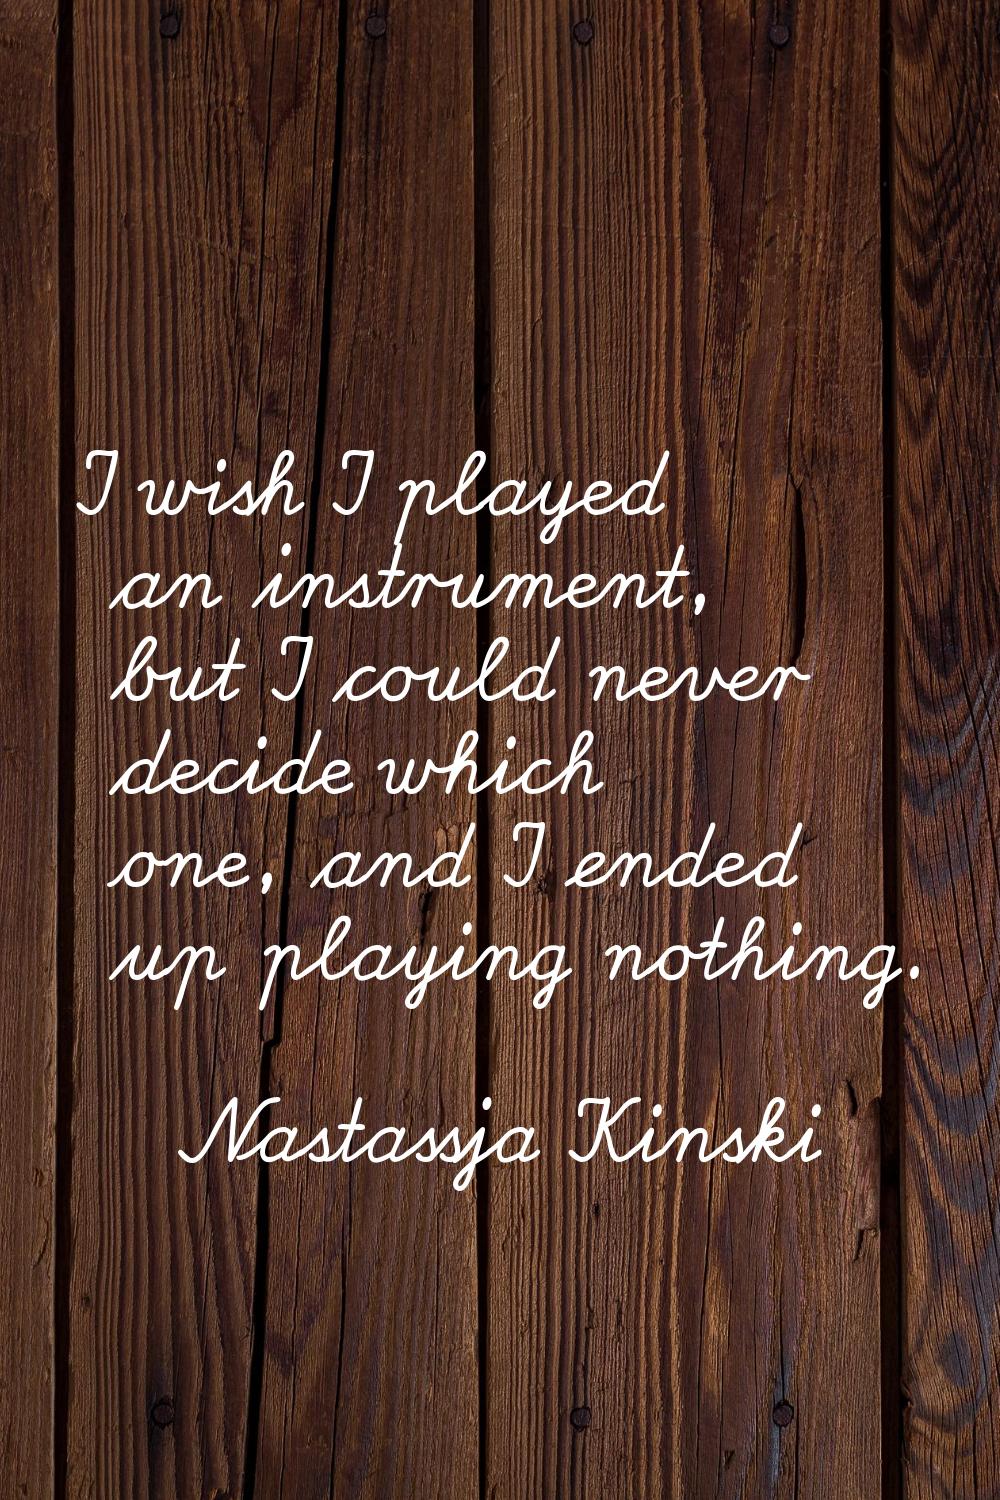 I wish I played an instrument, but I could never decide which one, and I ended up playing nothing.